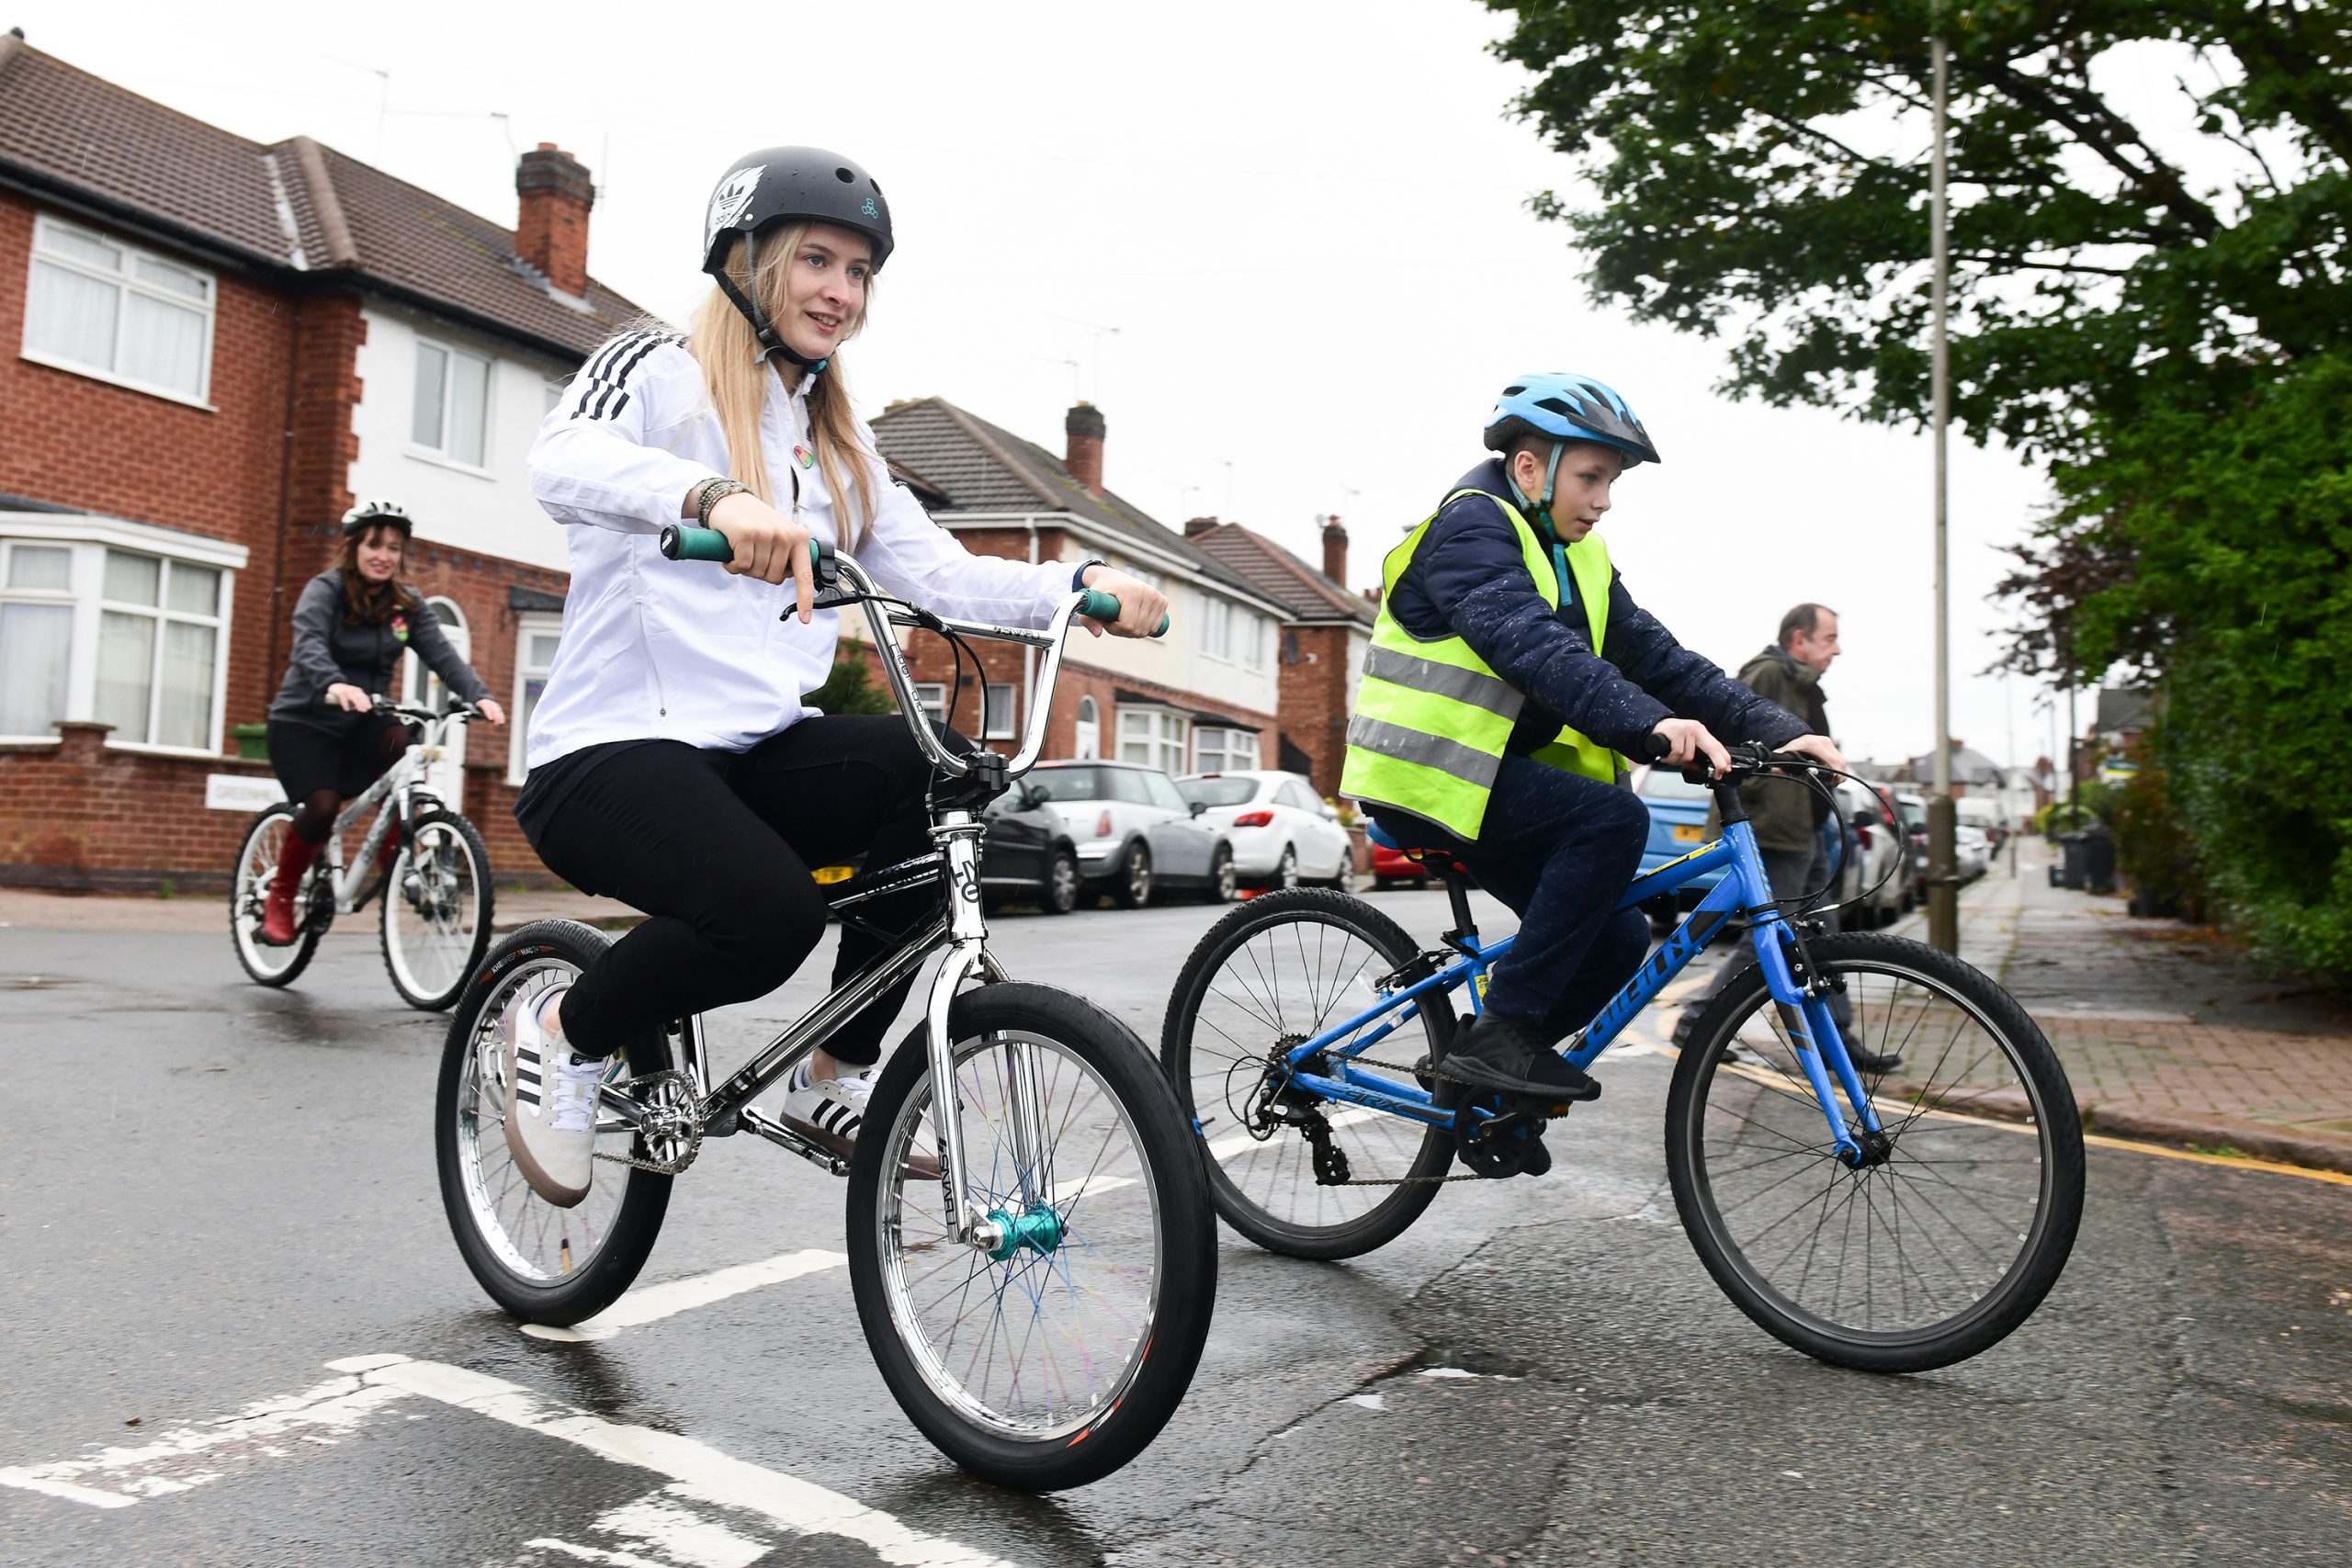 Charlotte Worthington is taking part in Bikeability cycle training. She is riding her bicycle in primary position next to a child on his bicycle. They are both wearing safety helmets.